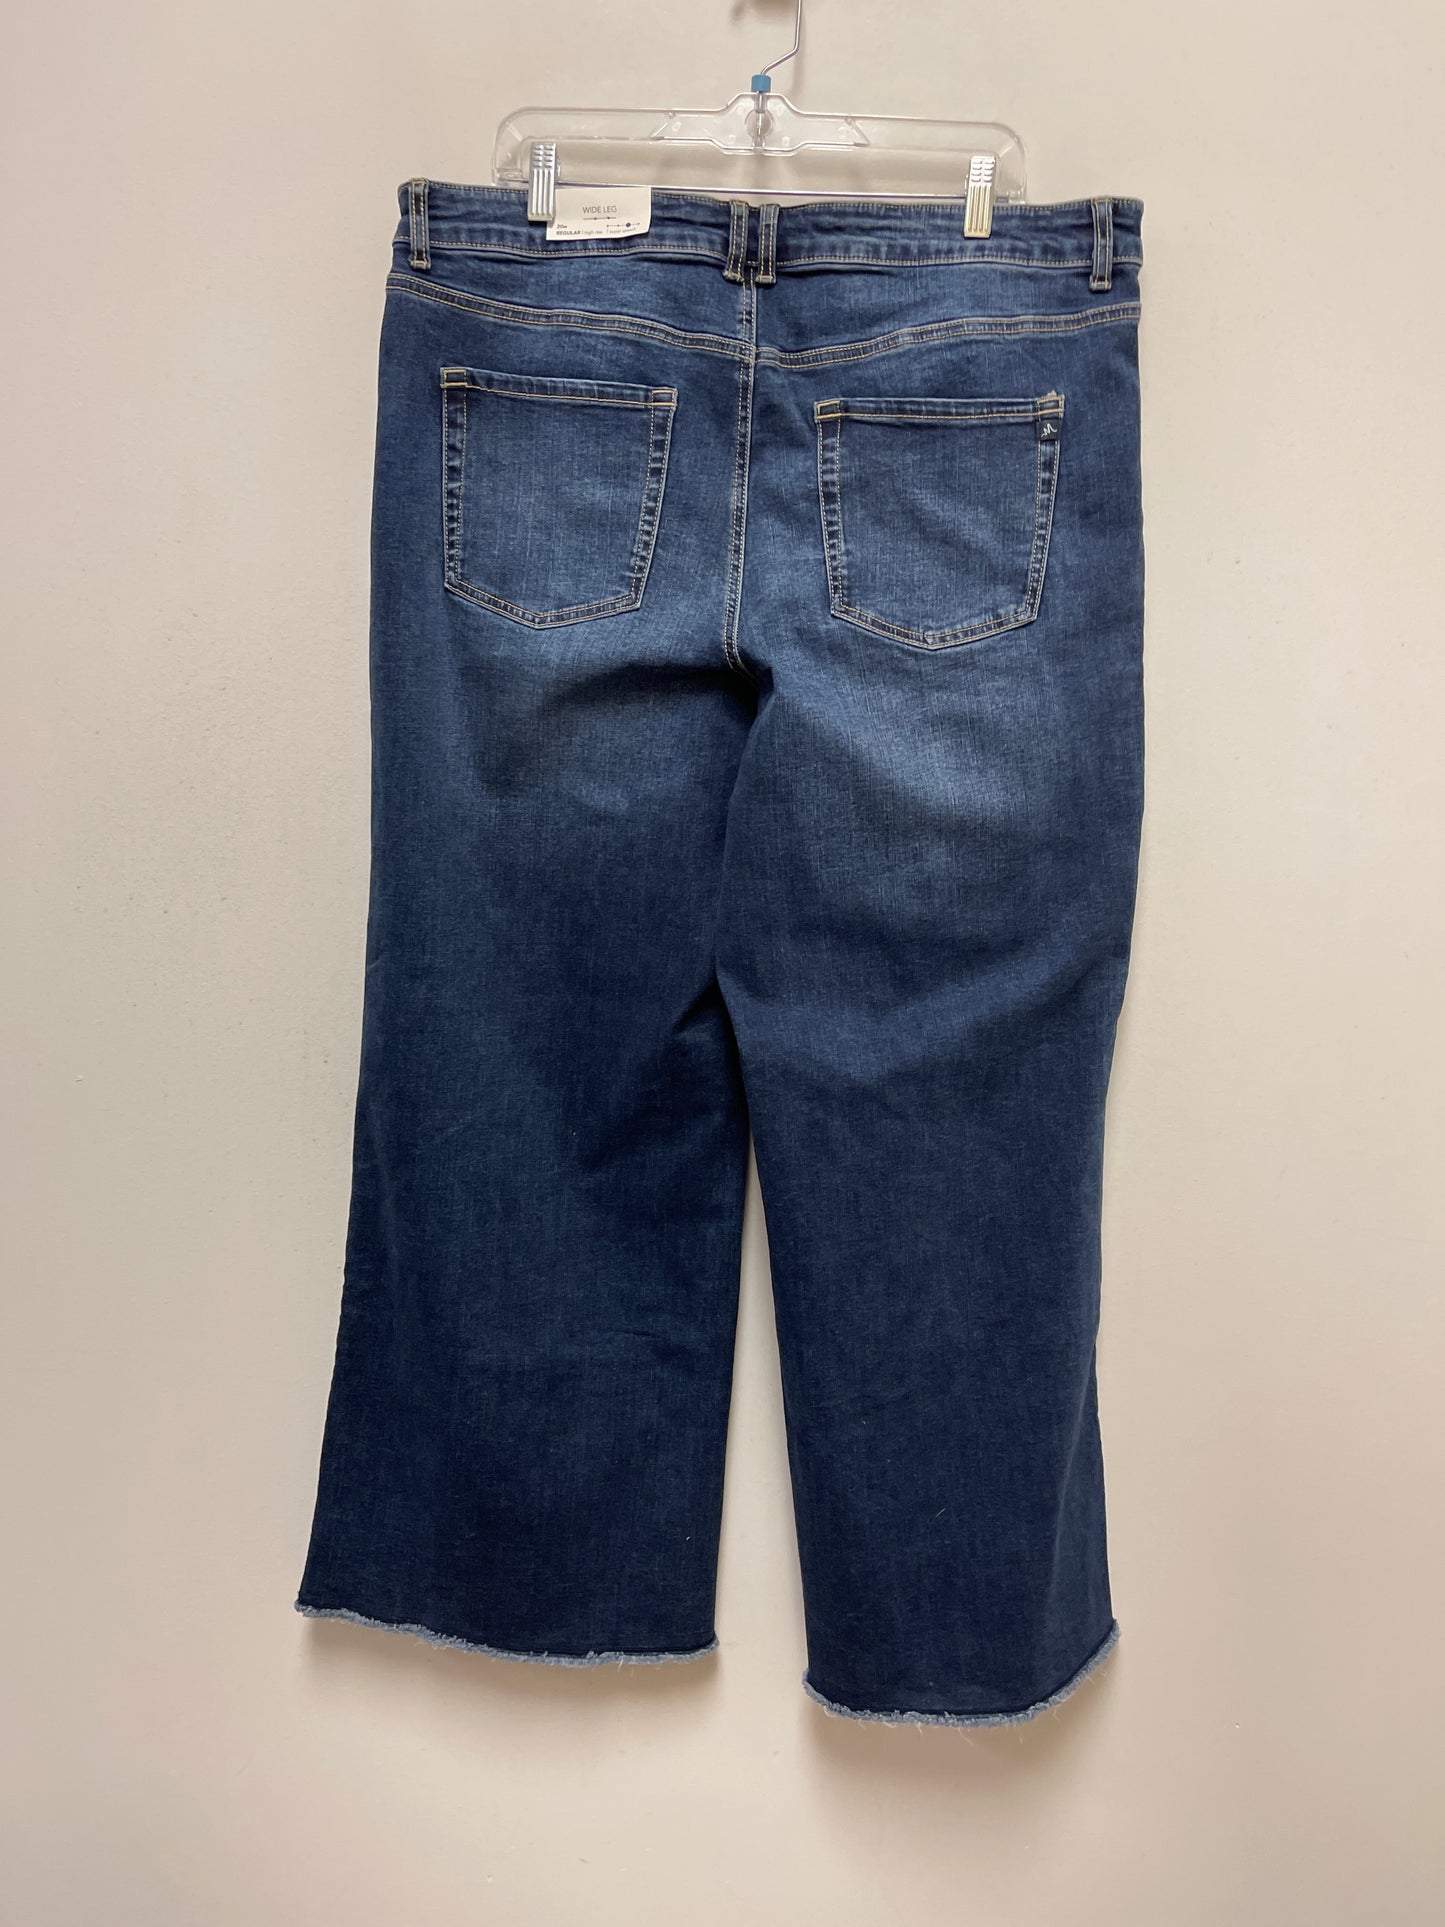 Blue Denim Jeans Straight Maurices, Size 20